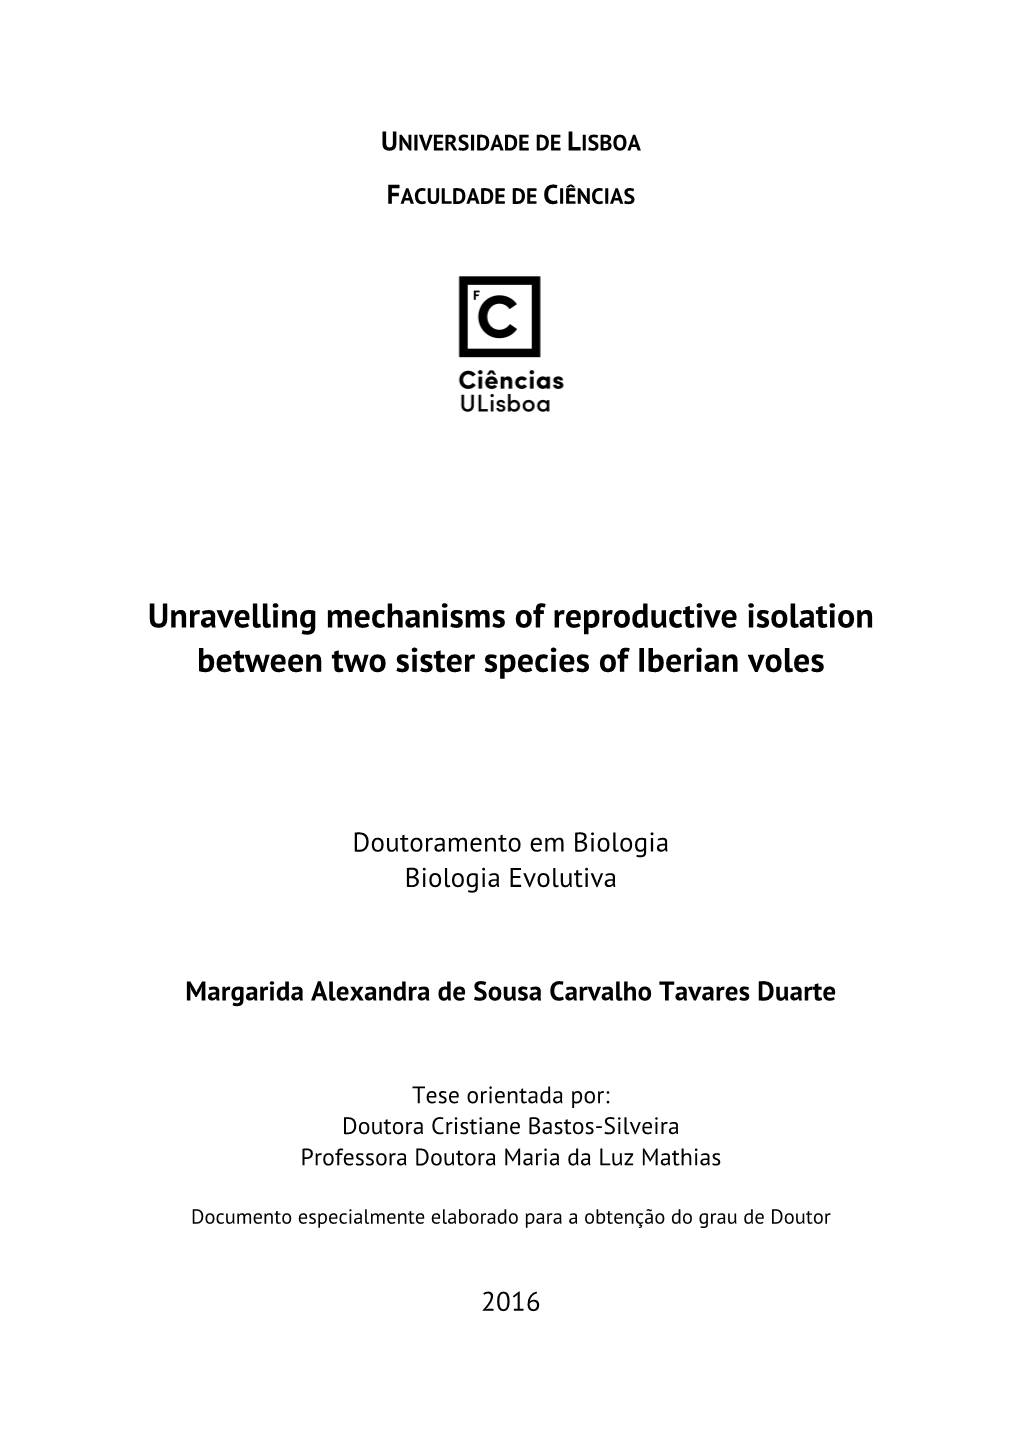 Unravelling Mechanisms of Reproductive Isolation Between Two Sister Species of Iberian Voles